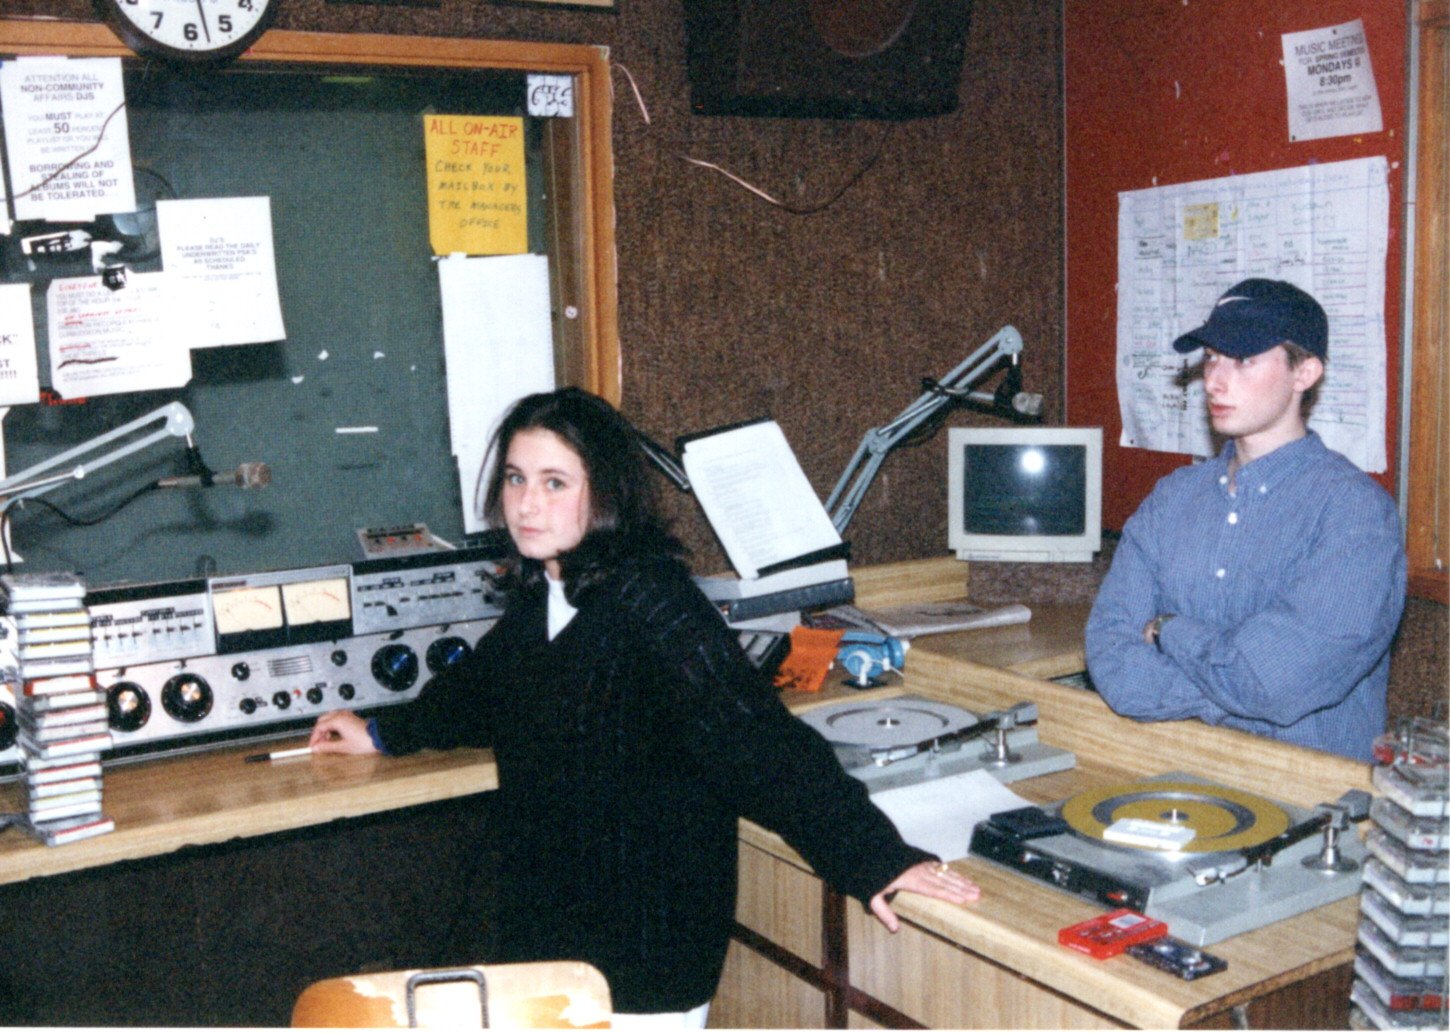 1997 The WRSU Transmitters Newer unit in Center, Original to the right.